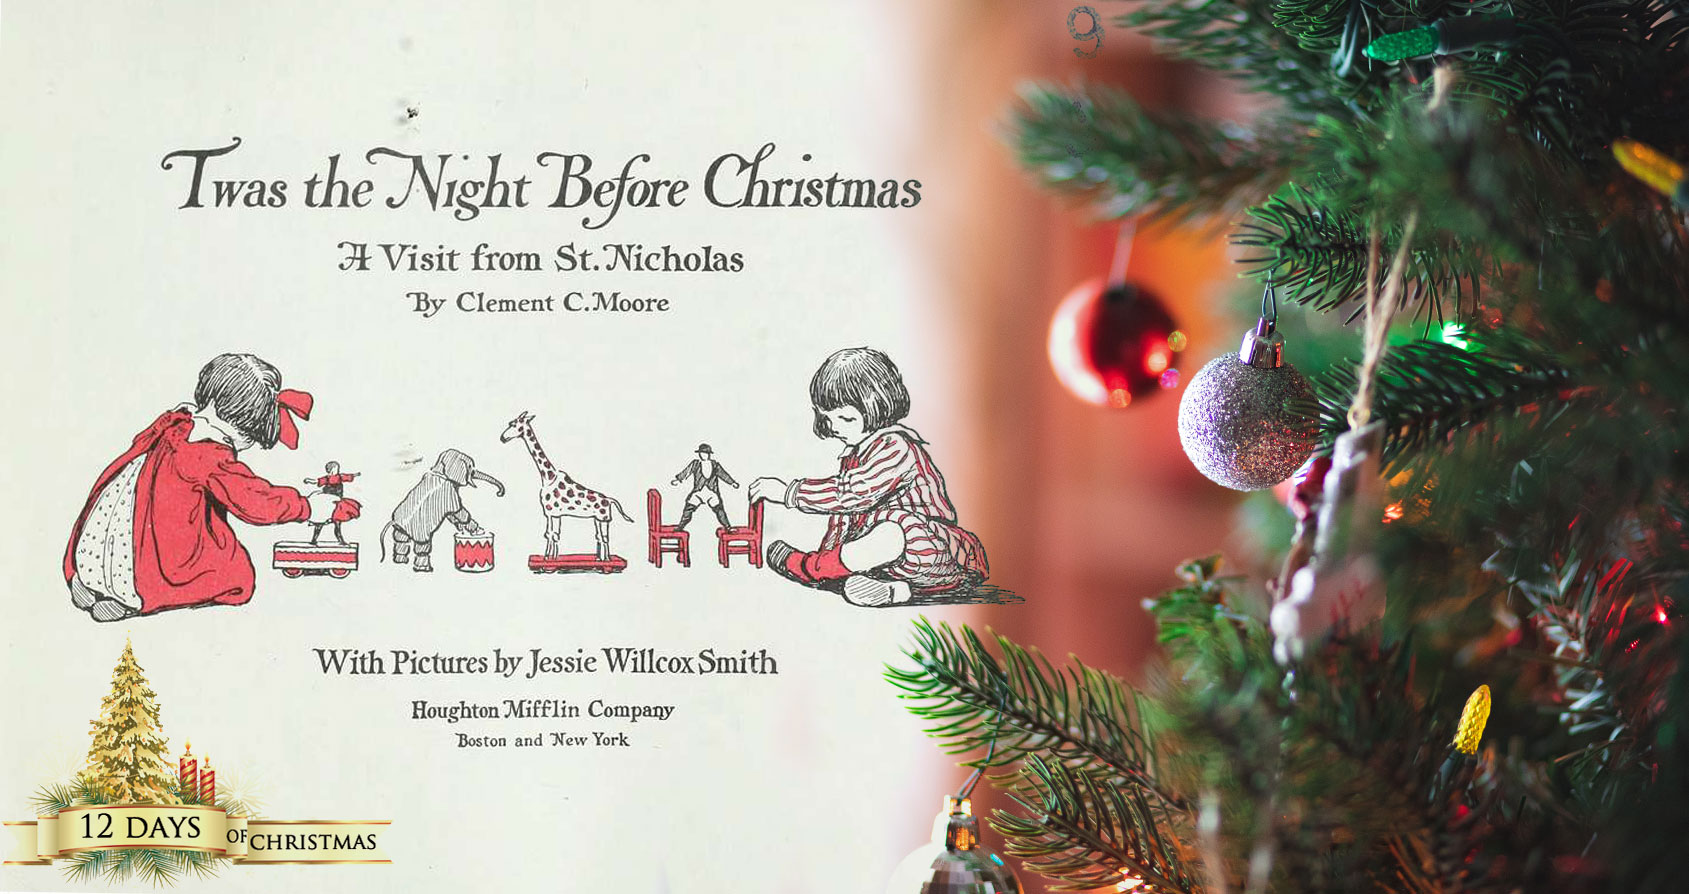 'Twas The Night Before Christmas, story by Jim Bates at Spillwords.com